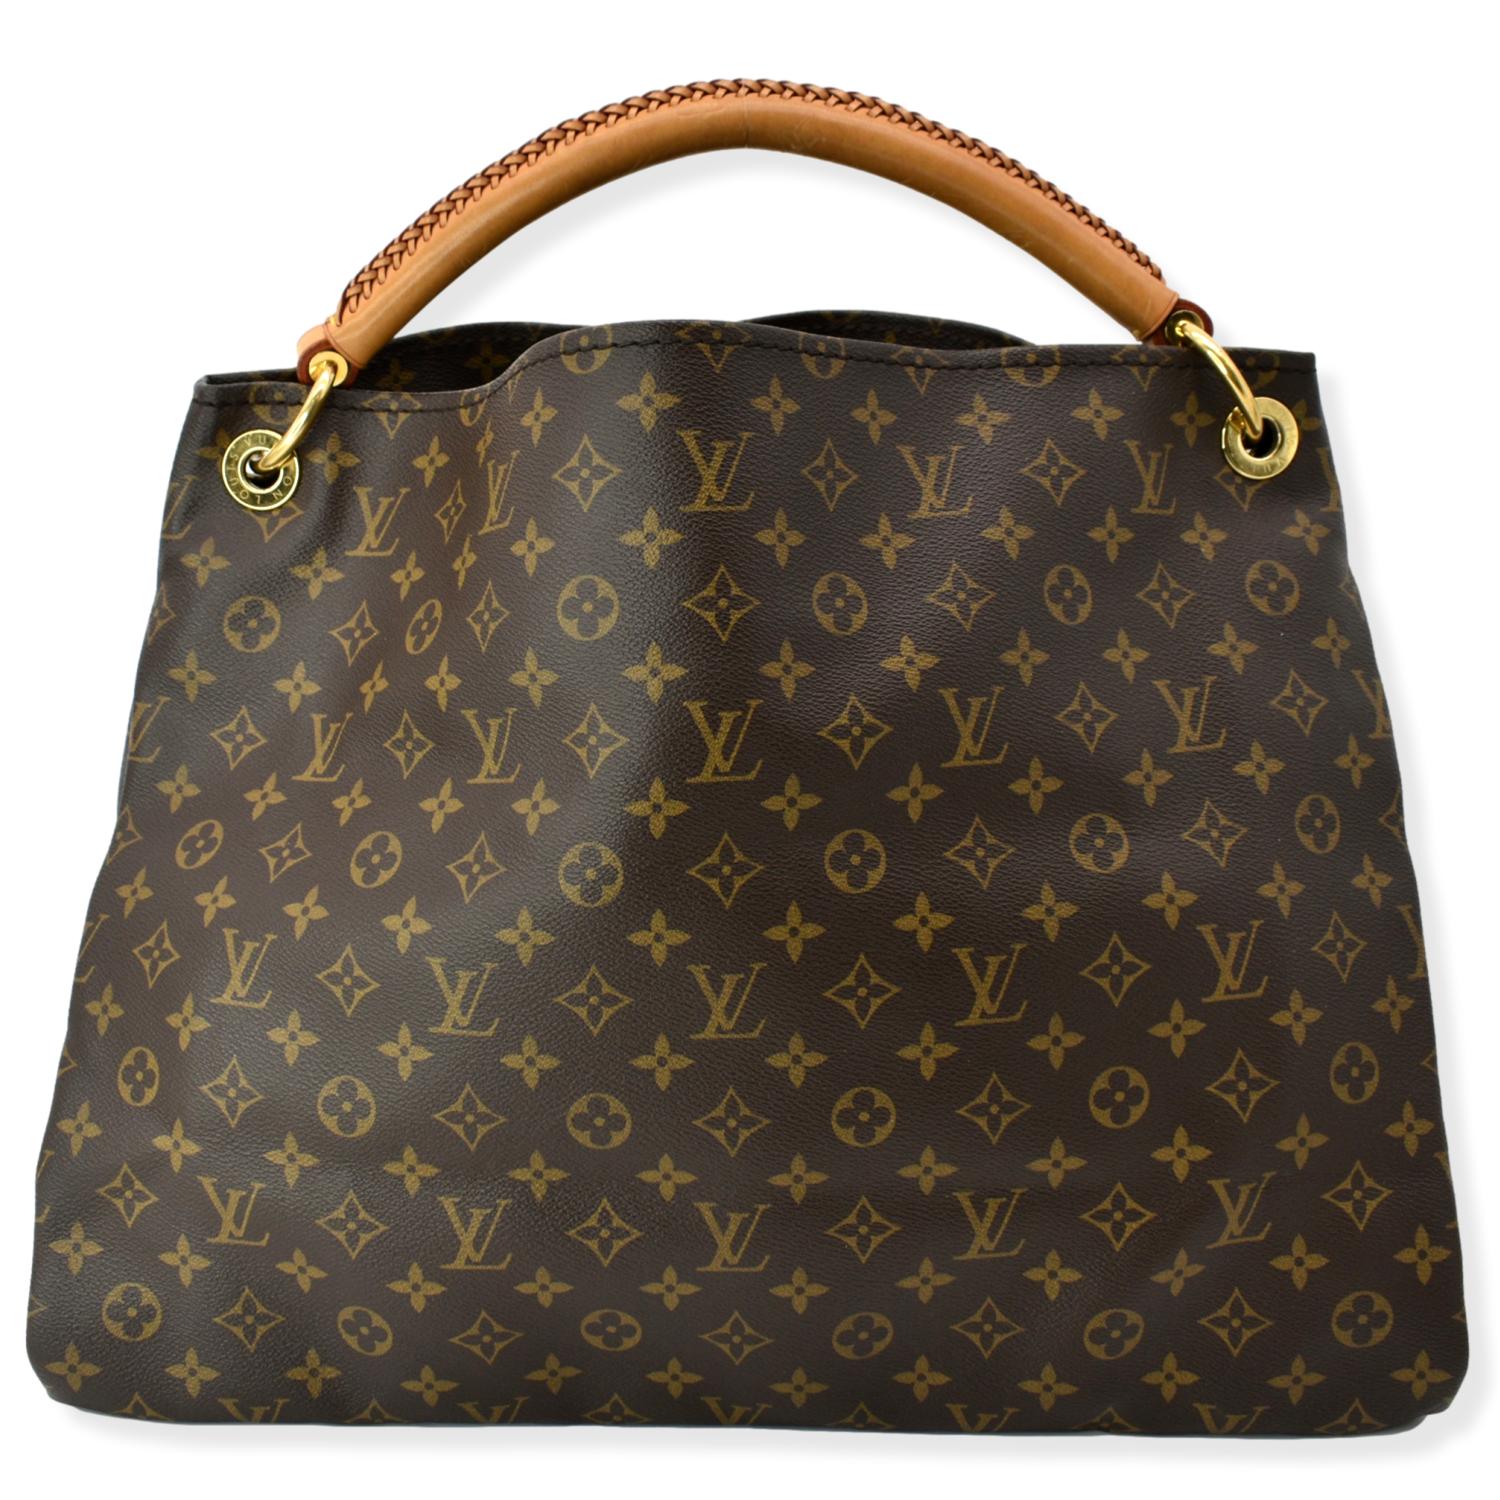 Both big bags but the Louis Vuitton Artsy GM is huge! #designerbags #f